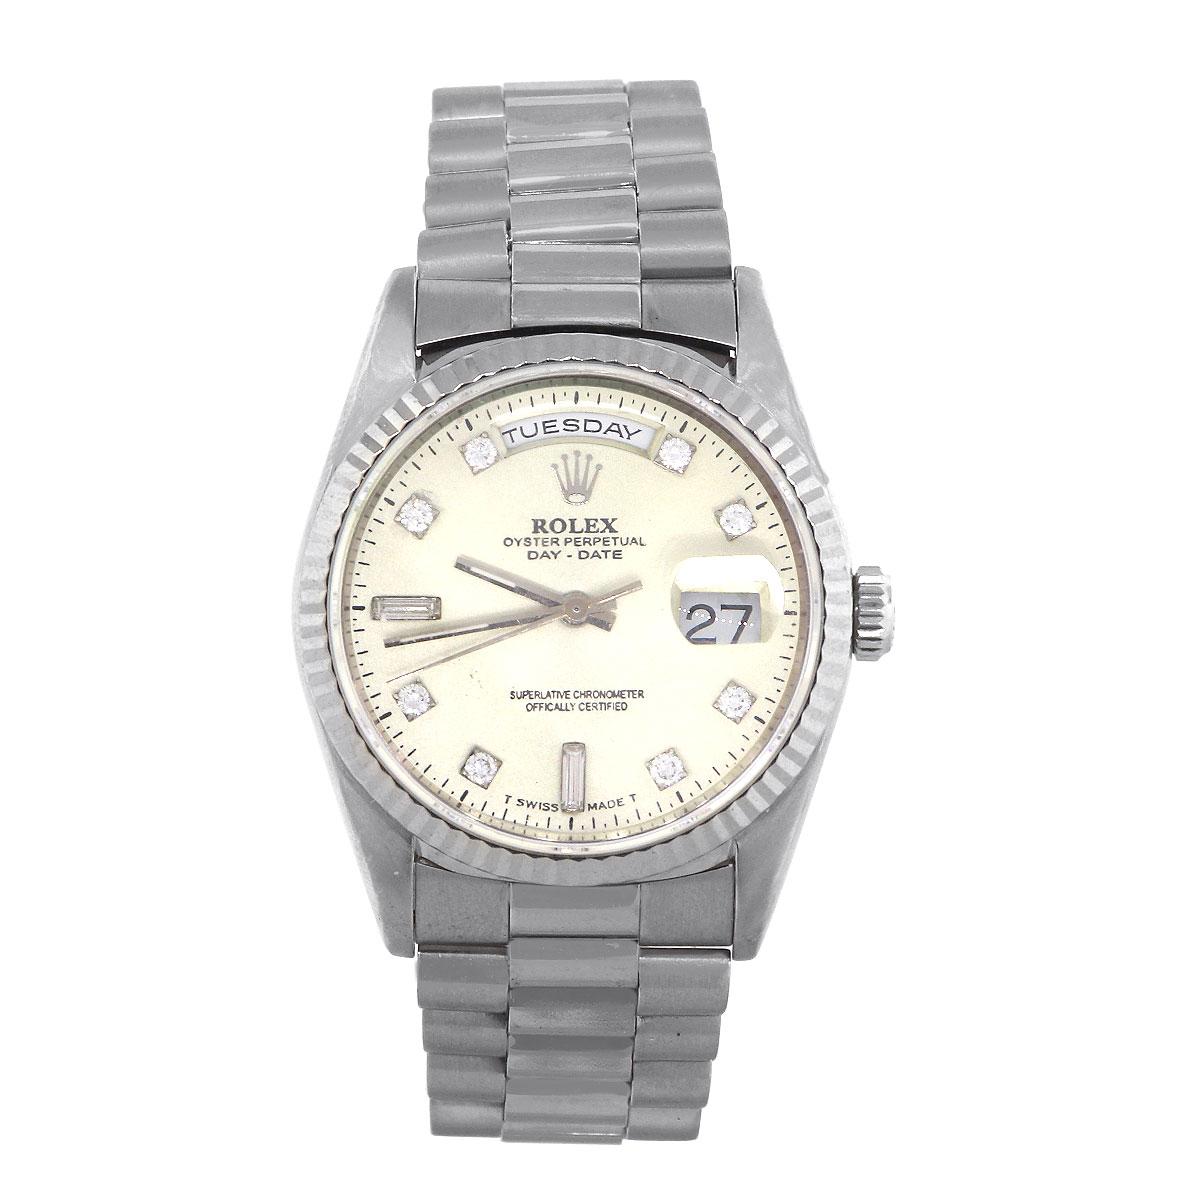 Brand: Rolex
MPN: 18239
Model: Day-Date
Case Material: 18k White Gold
Case Diameter: 36 mm
Crystal: Scratch resistant sapphire
Bezel: White Gold Fluted Bezel
Dial: Off white (Aging) dial with silver hands and diamond markers. Day can be found at 12